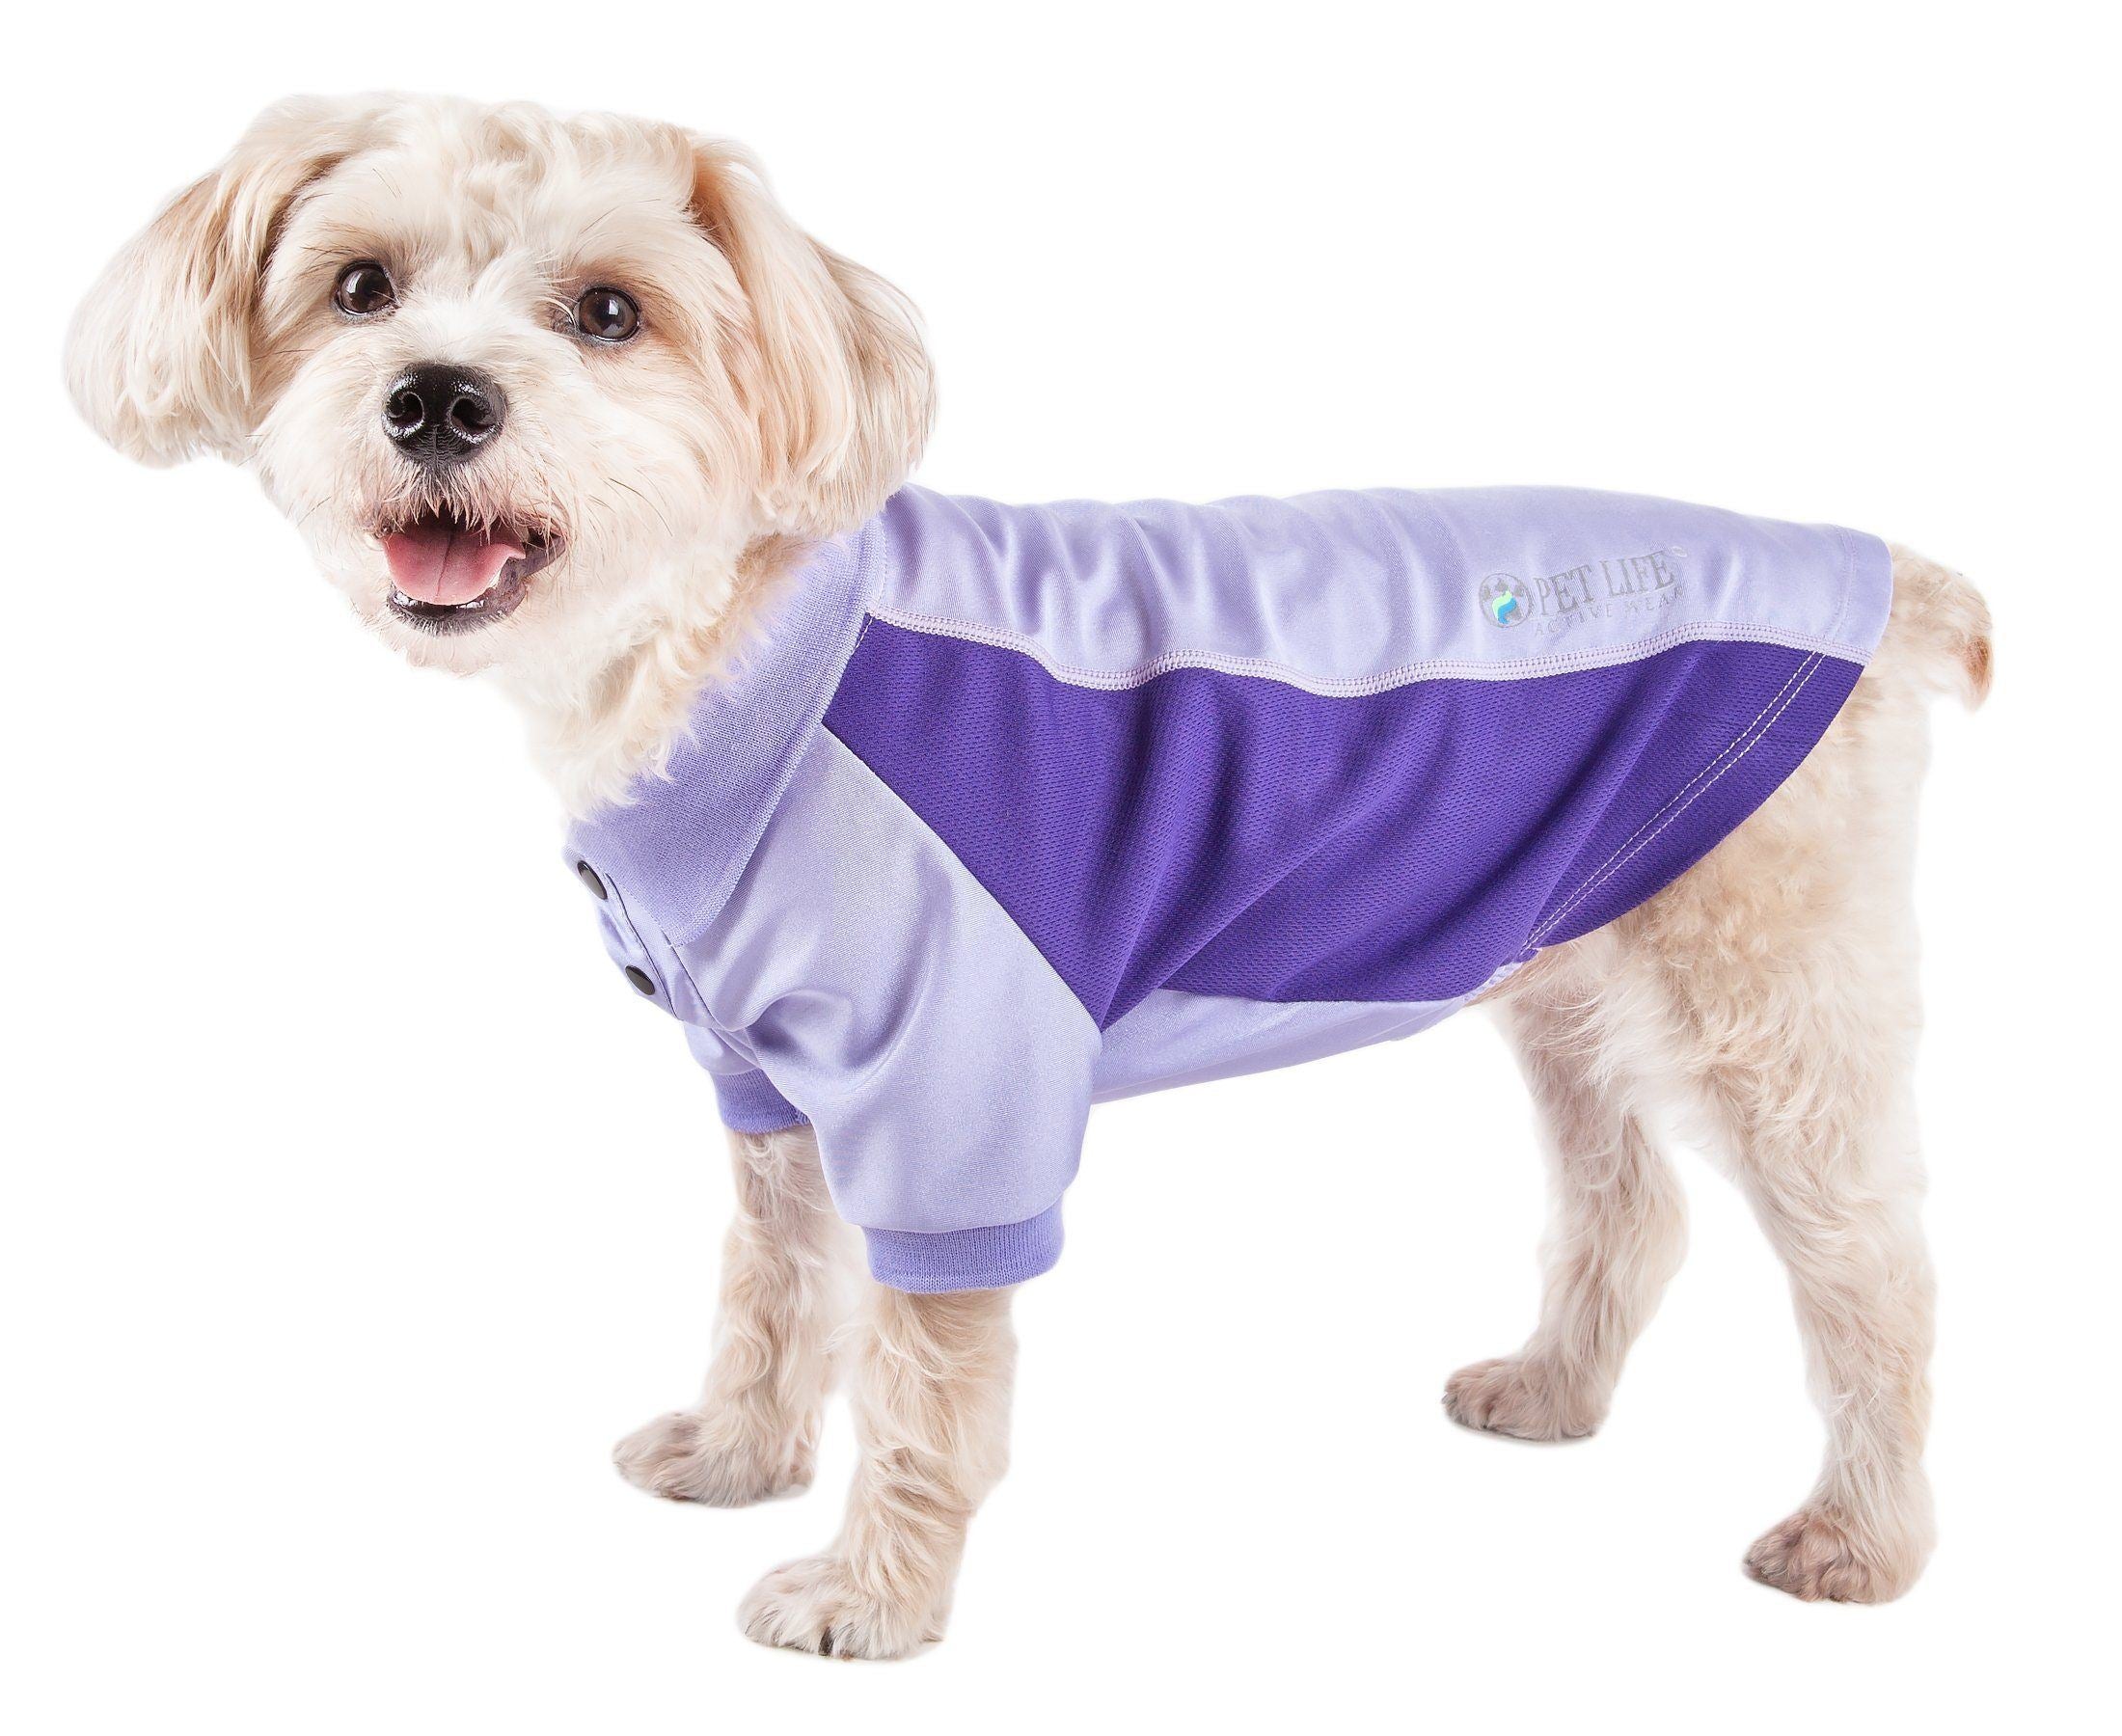 Pet Life ® Active 'Barko Pawlo' Relax-Stretch Quick-Drying Performance Dog Polo T-Shirt X-Small Lavander